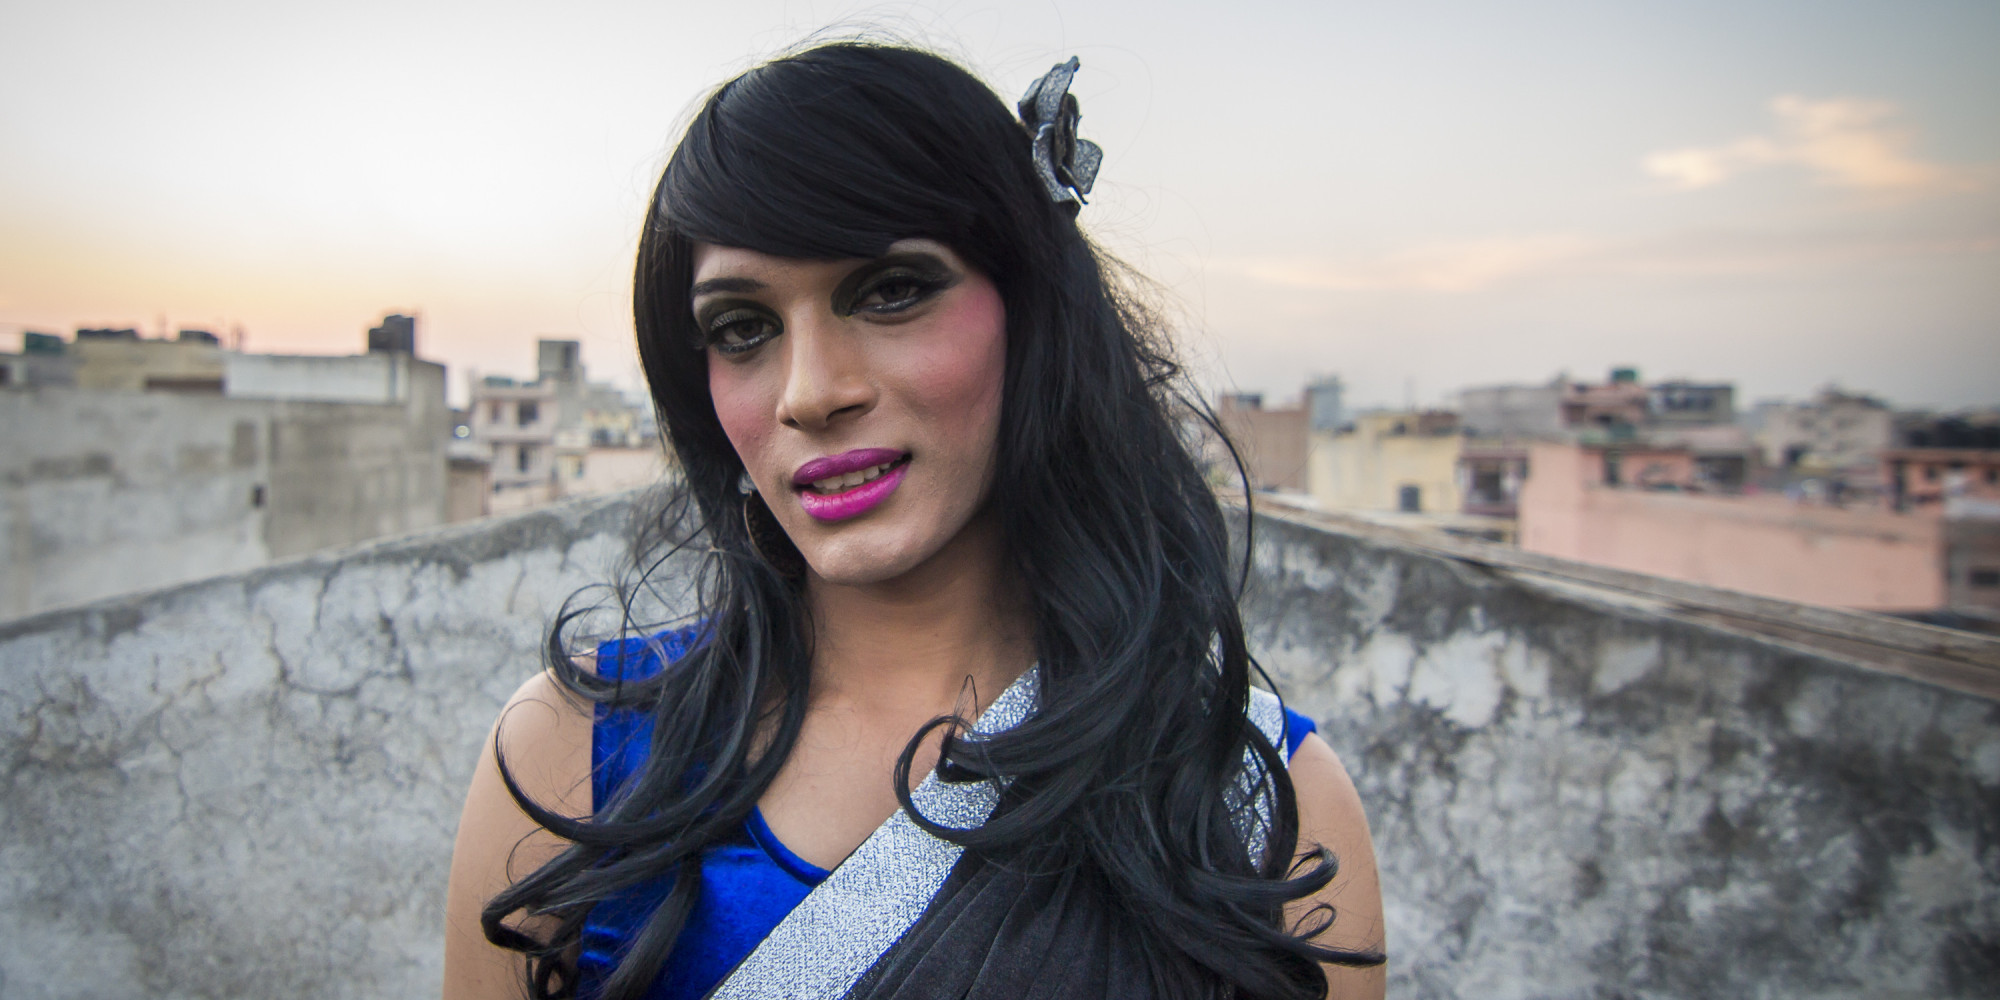 NEW DELHI, INDIA - FEBRUARY: Alex who is known as 'Mona', a transgender, who wants to be a model, poses for a photograph in February 2015, in New Delhi, India.

BEING transgender in India is no easy matter - with trans people regularly coming up against intense prejudice, including verbal and physical threats. But in the face of that hostility, a group of trans models have come together in Delhi to create a new calendar celebrating their unique community. With very few opportunities available for transgender people to enter the field of mainstream modelling, the group decided to take a more DIY approach - which they hope will be first step towards their acceptance by wider Indian society. 

PHOTOGRAPH BY Sujatro Ghosh / Barcroft India

UK Office, London.
T +44 845 370 2233
W www.barcroftmedia.com

USA Office, New York City.
T +1 212 796 2458
W www.barcroftusa.com

Indian Office, Delhi.
T +91 11 4053 2429
W www.barcroftindia.com